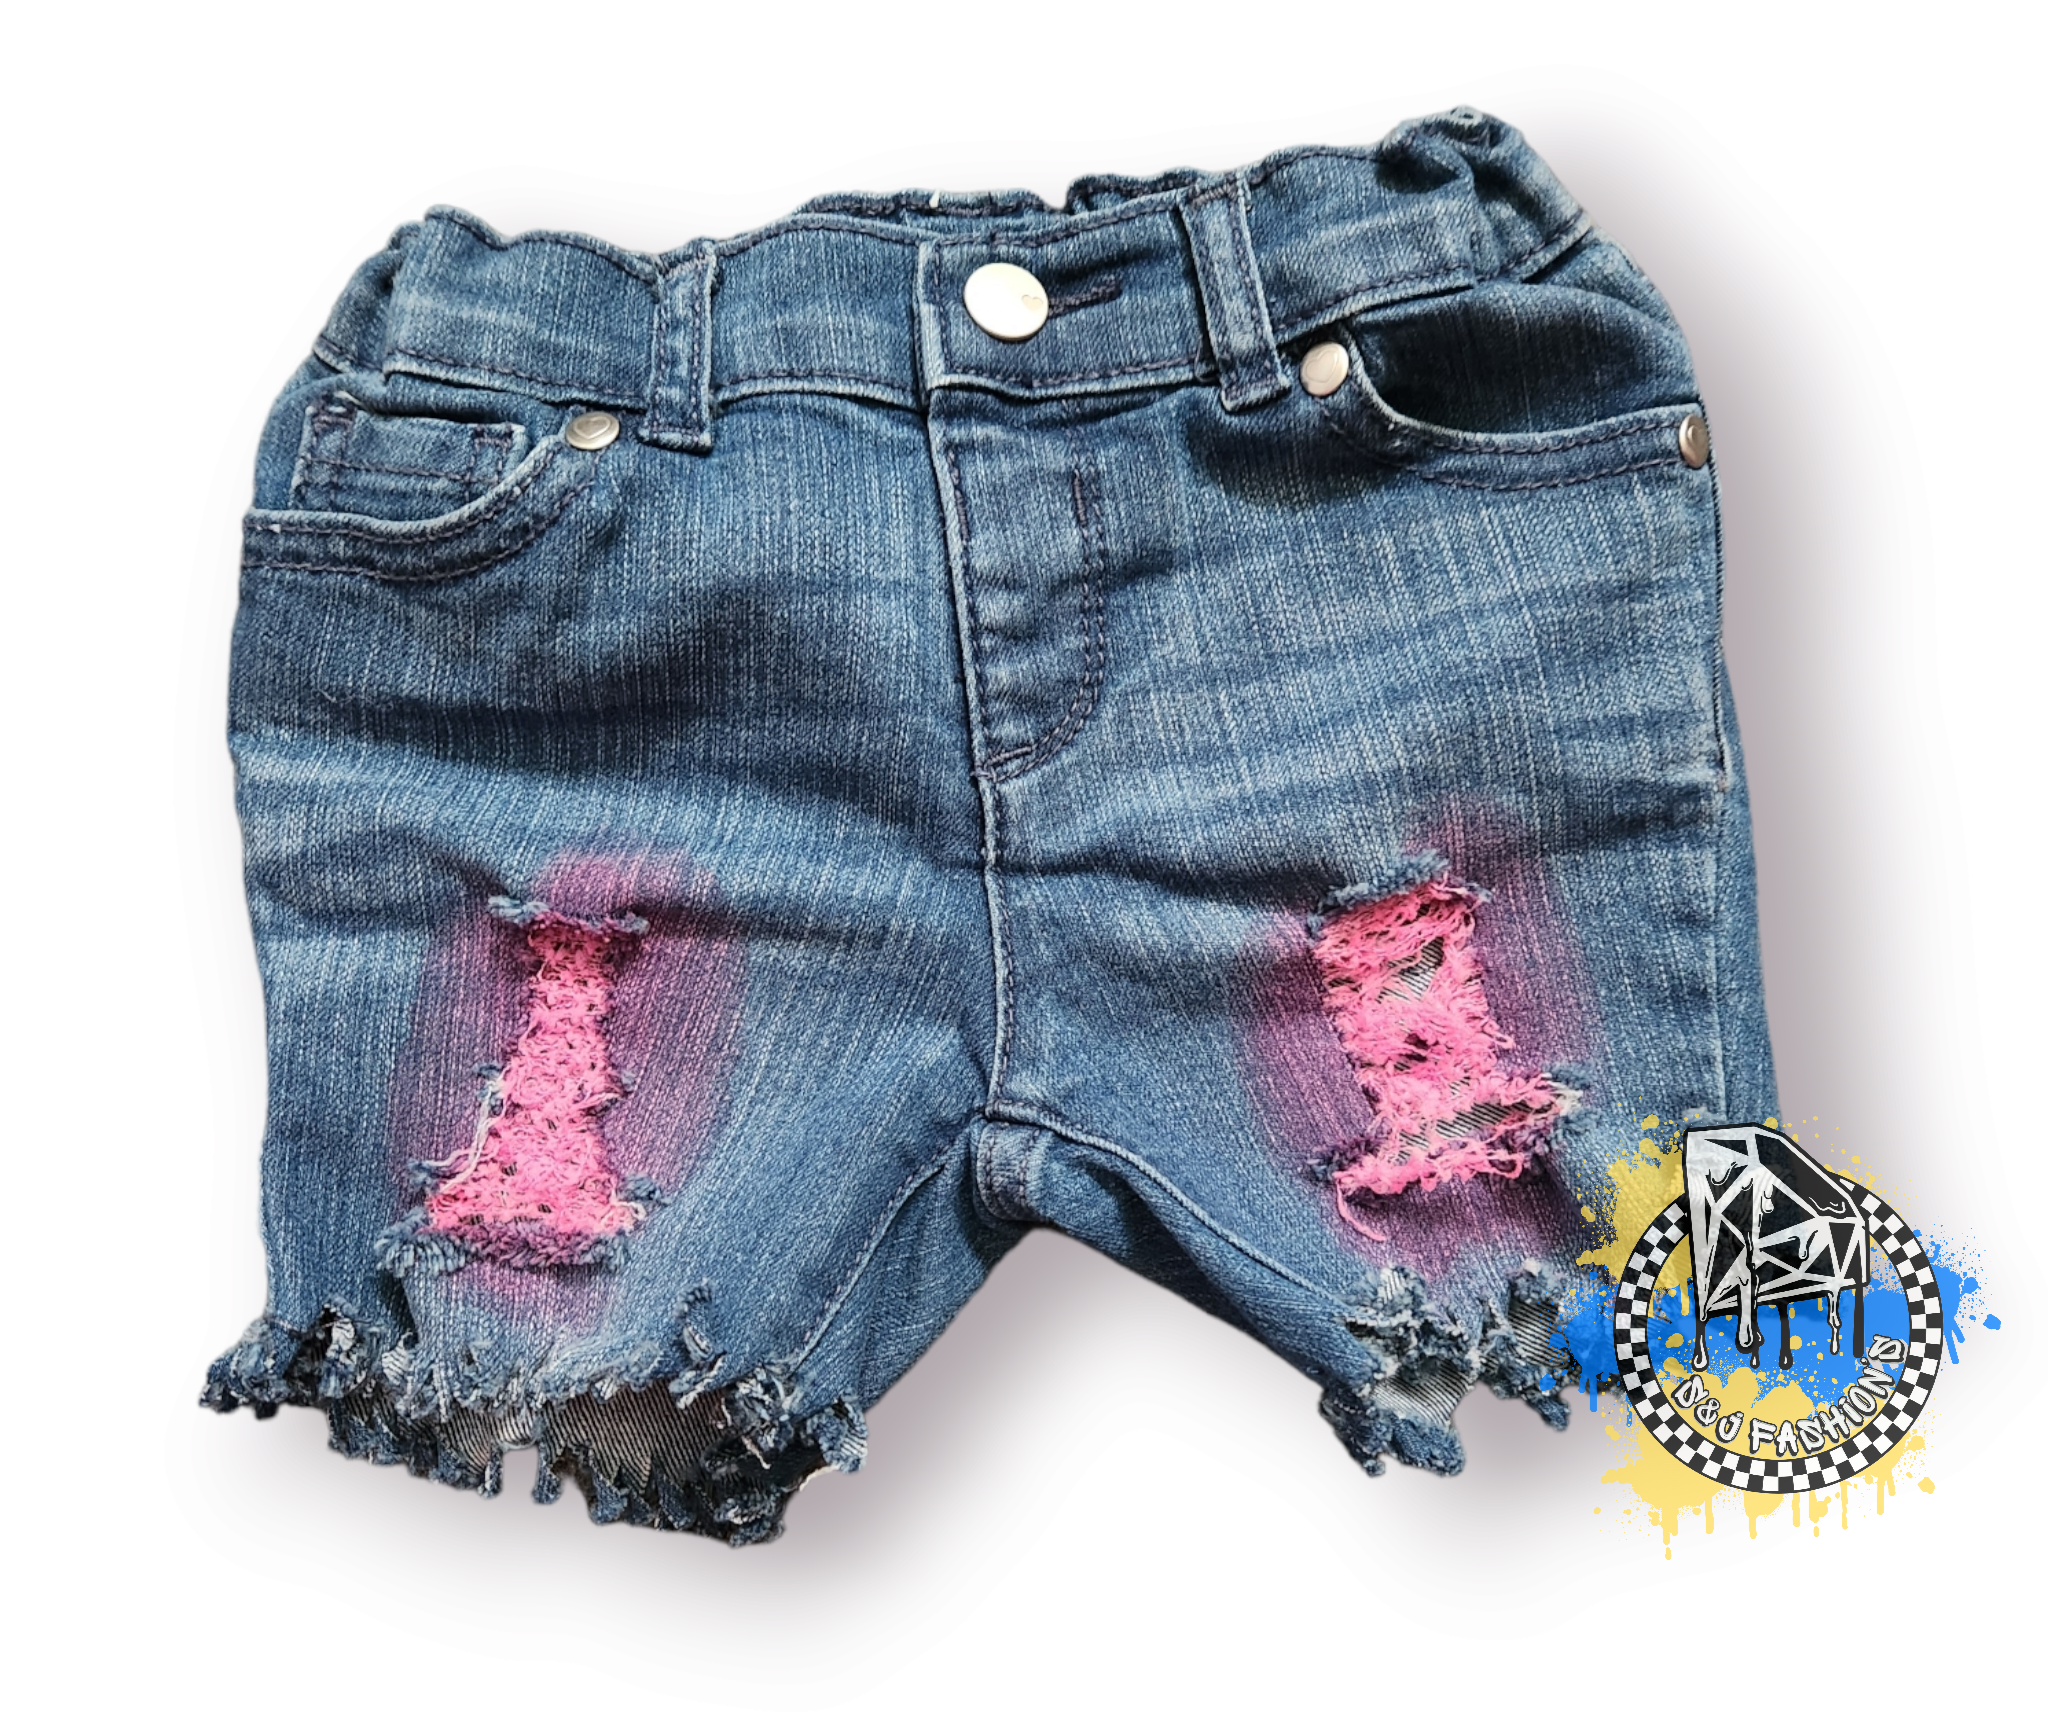 Neon Pink Boys Distressed Jeans Shorts Girls Distressed Jean Shorts